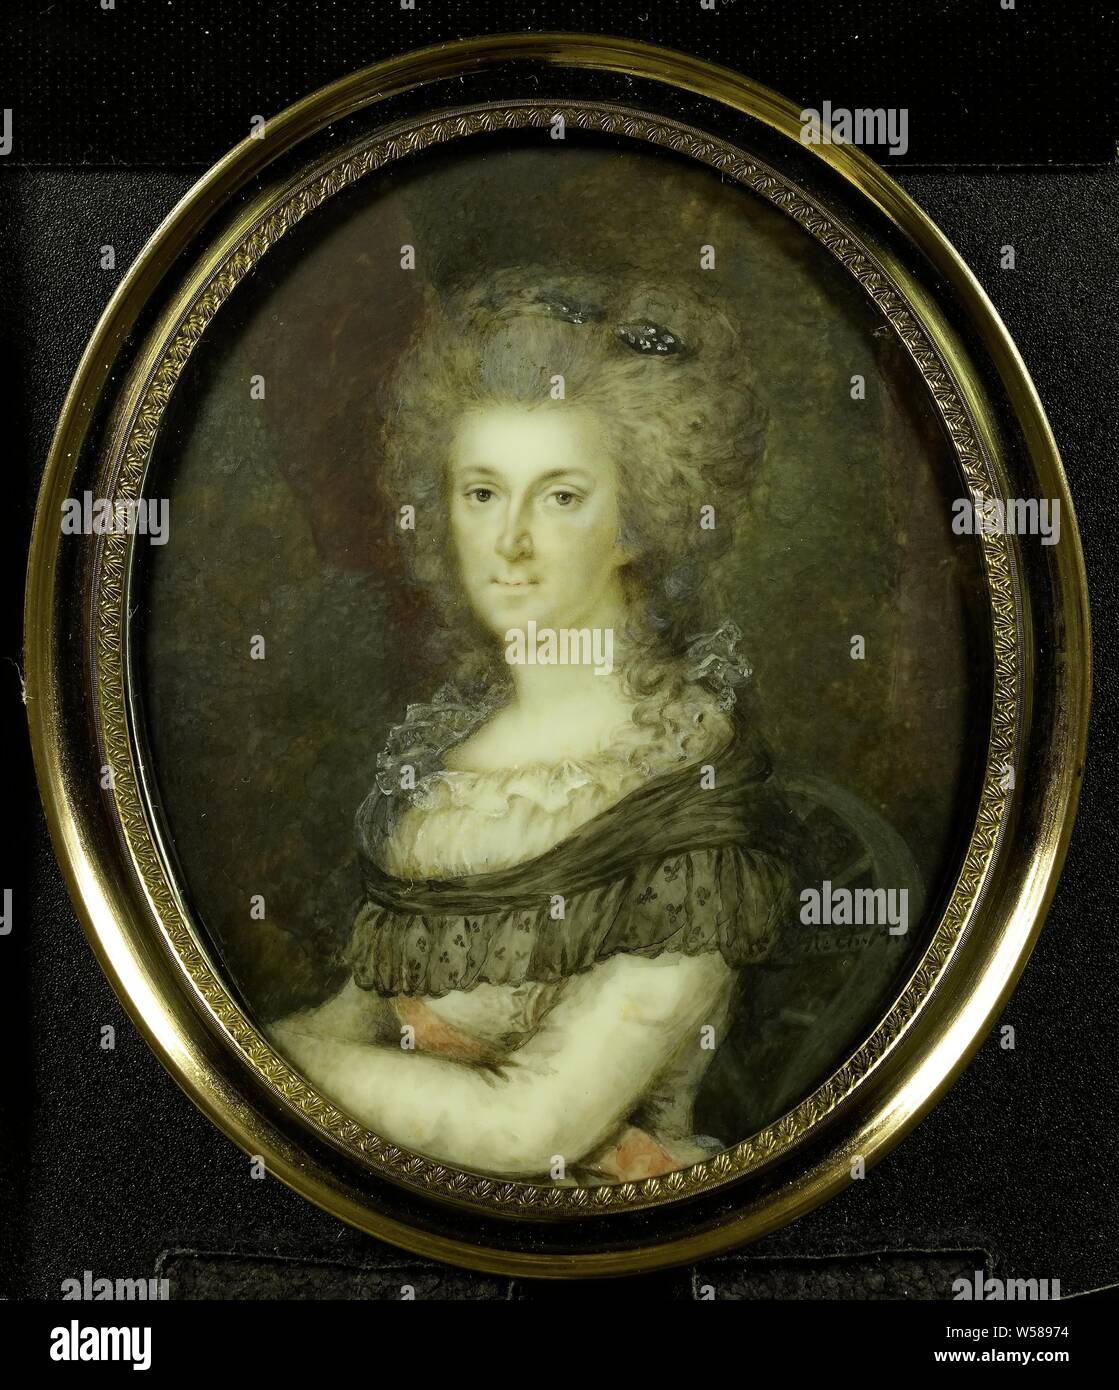 Frederika Sophia Wilhelmina (Wilhelmina, 1747-1820), princess of Prussia. Wife of Prince William V, Portrait of Frederika Sophia Wilhelmina (1747-1820), Princess of Prussia. Wife of Prince Willem V. Halfway, sitting in a chair, to the left. Part of the collection of portrait miniatures, Wilhelmina van Prussia (1751-1820), Loch. Phaff, 1767 - 1820, ivory, metal, glass, h 10 cm × w 7.8 cm h 11.1 cm × w 9.4 cm × d 0.7 cm Stock Photo